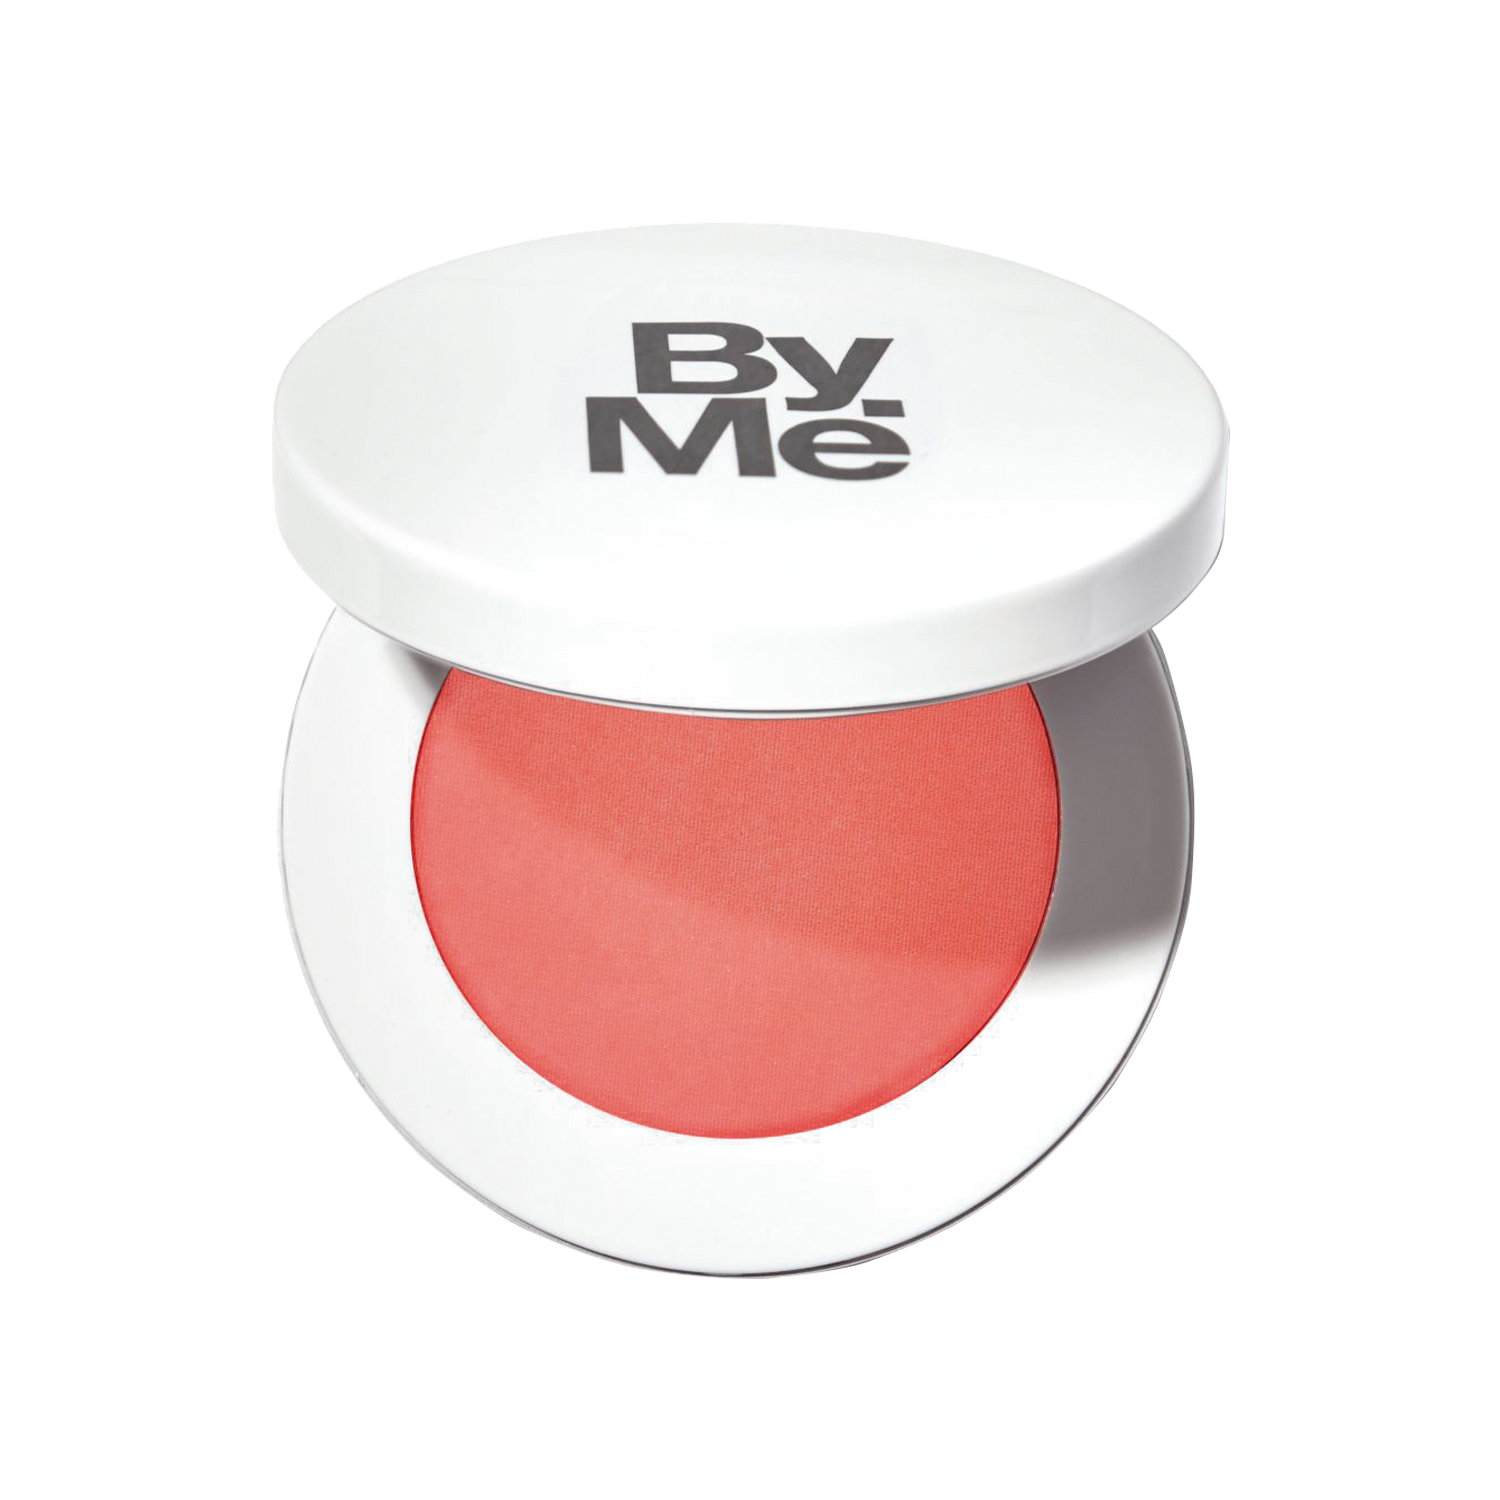 MyBeautyBrand Pure Power Blush in India Coral 502  1